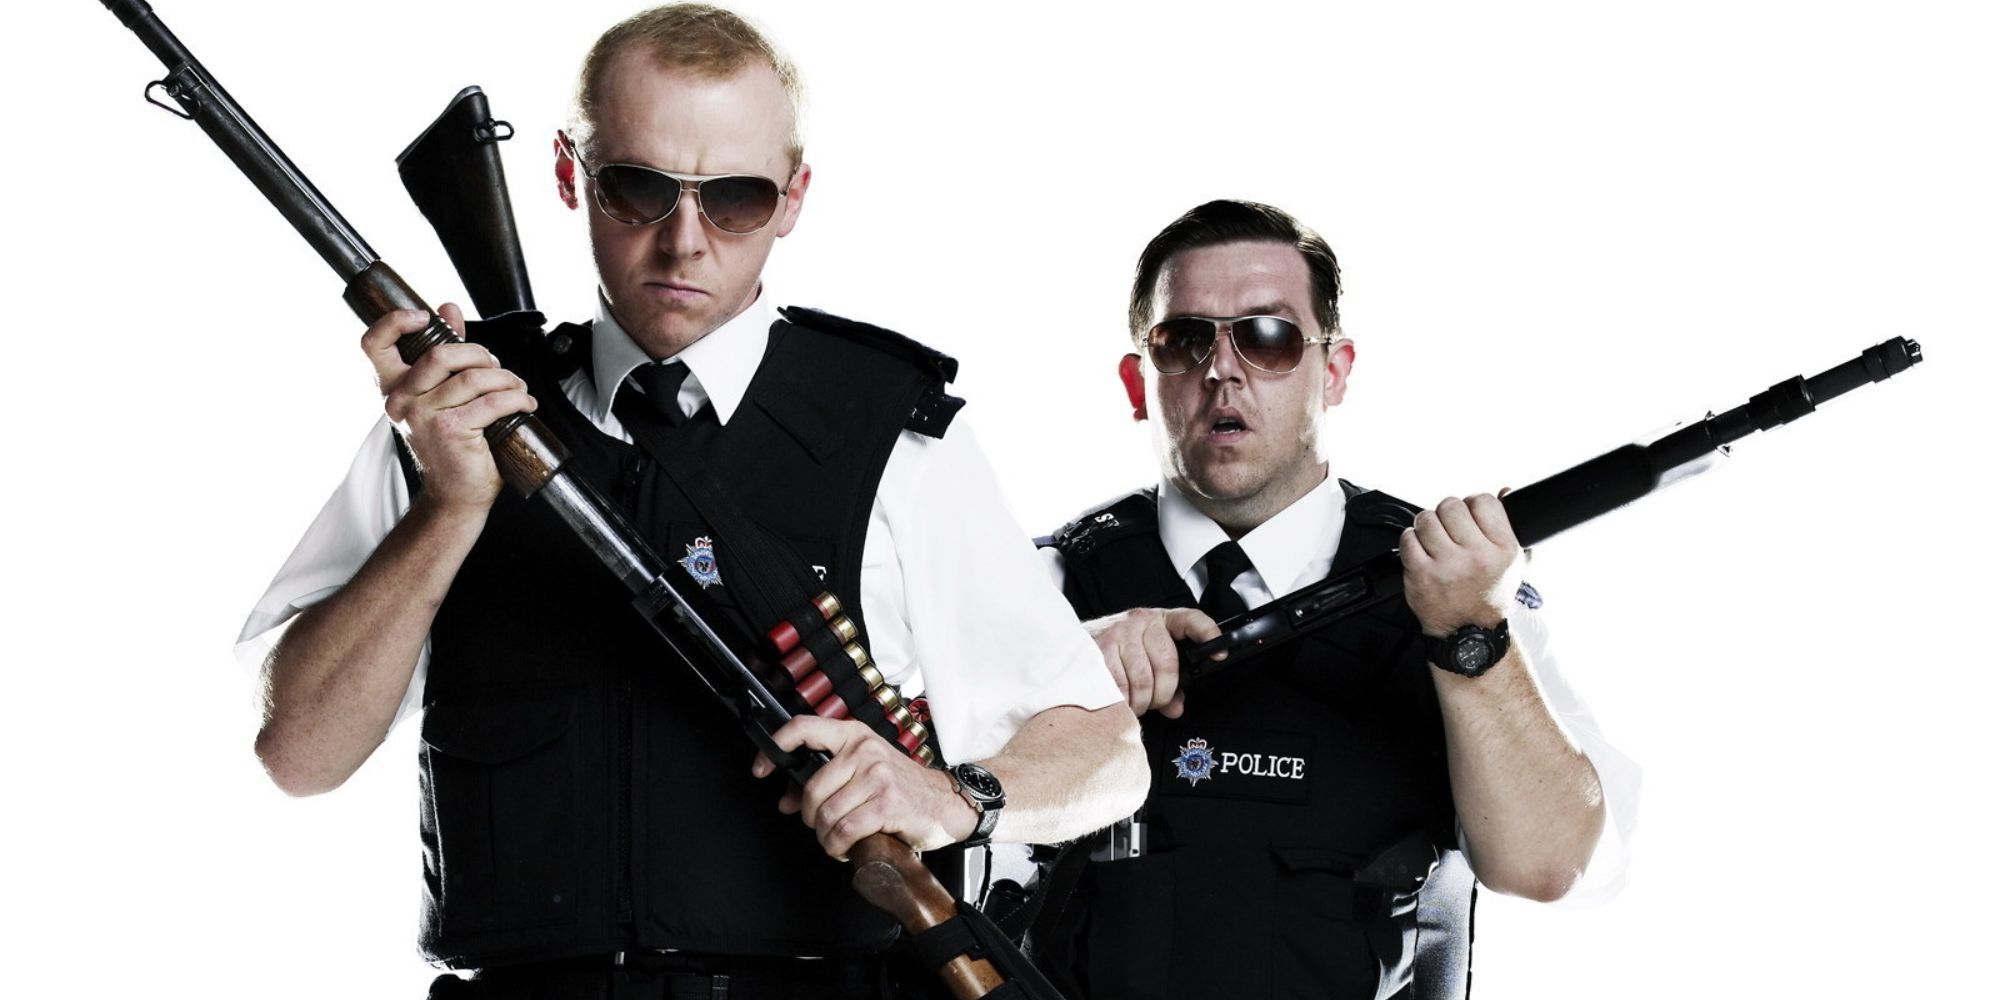 Poster from the 2007 film Hot Fuzz showing Simon Pegg and Nick Frost with guns.